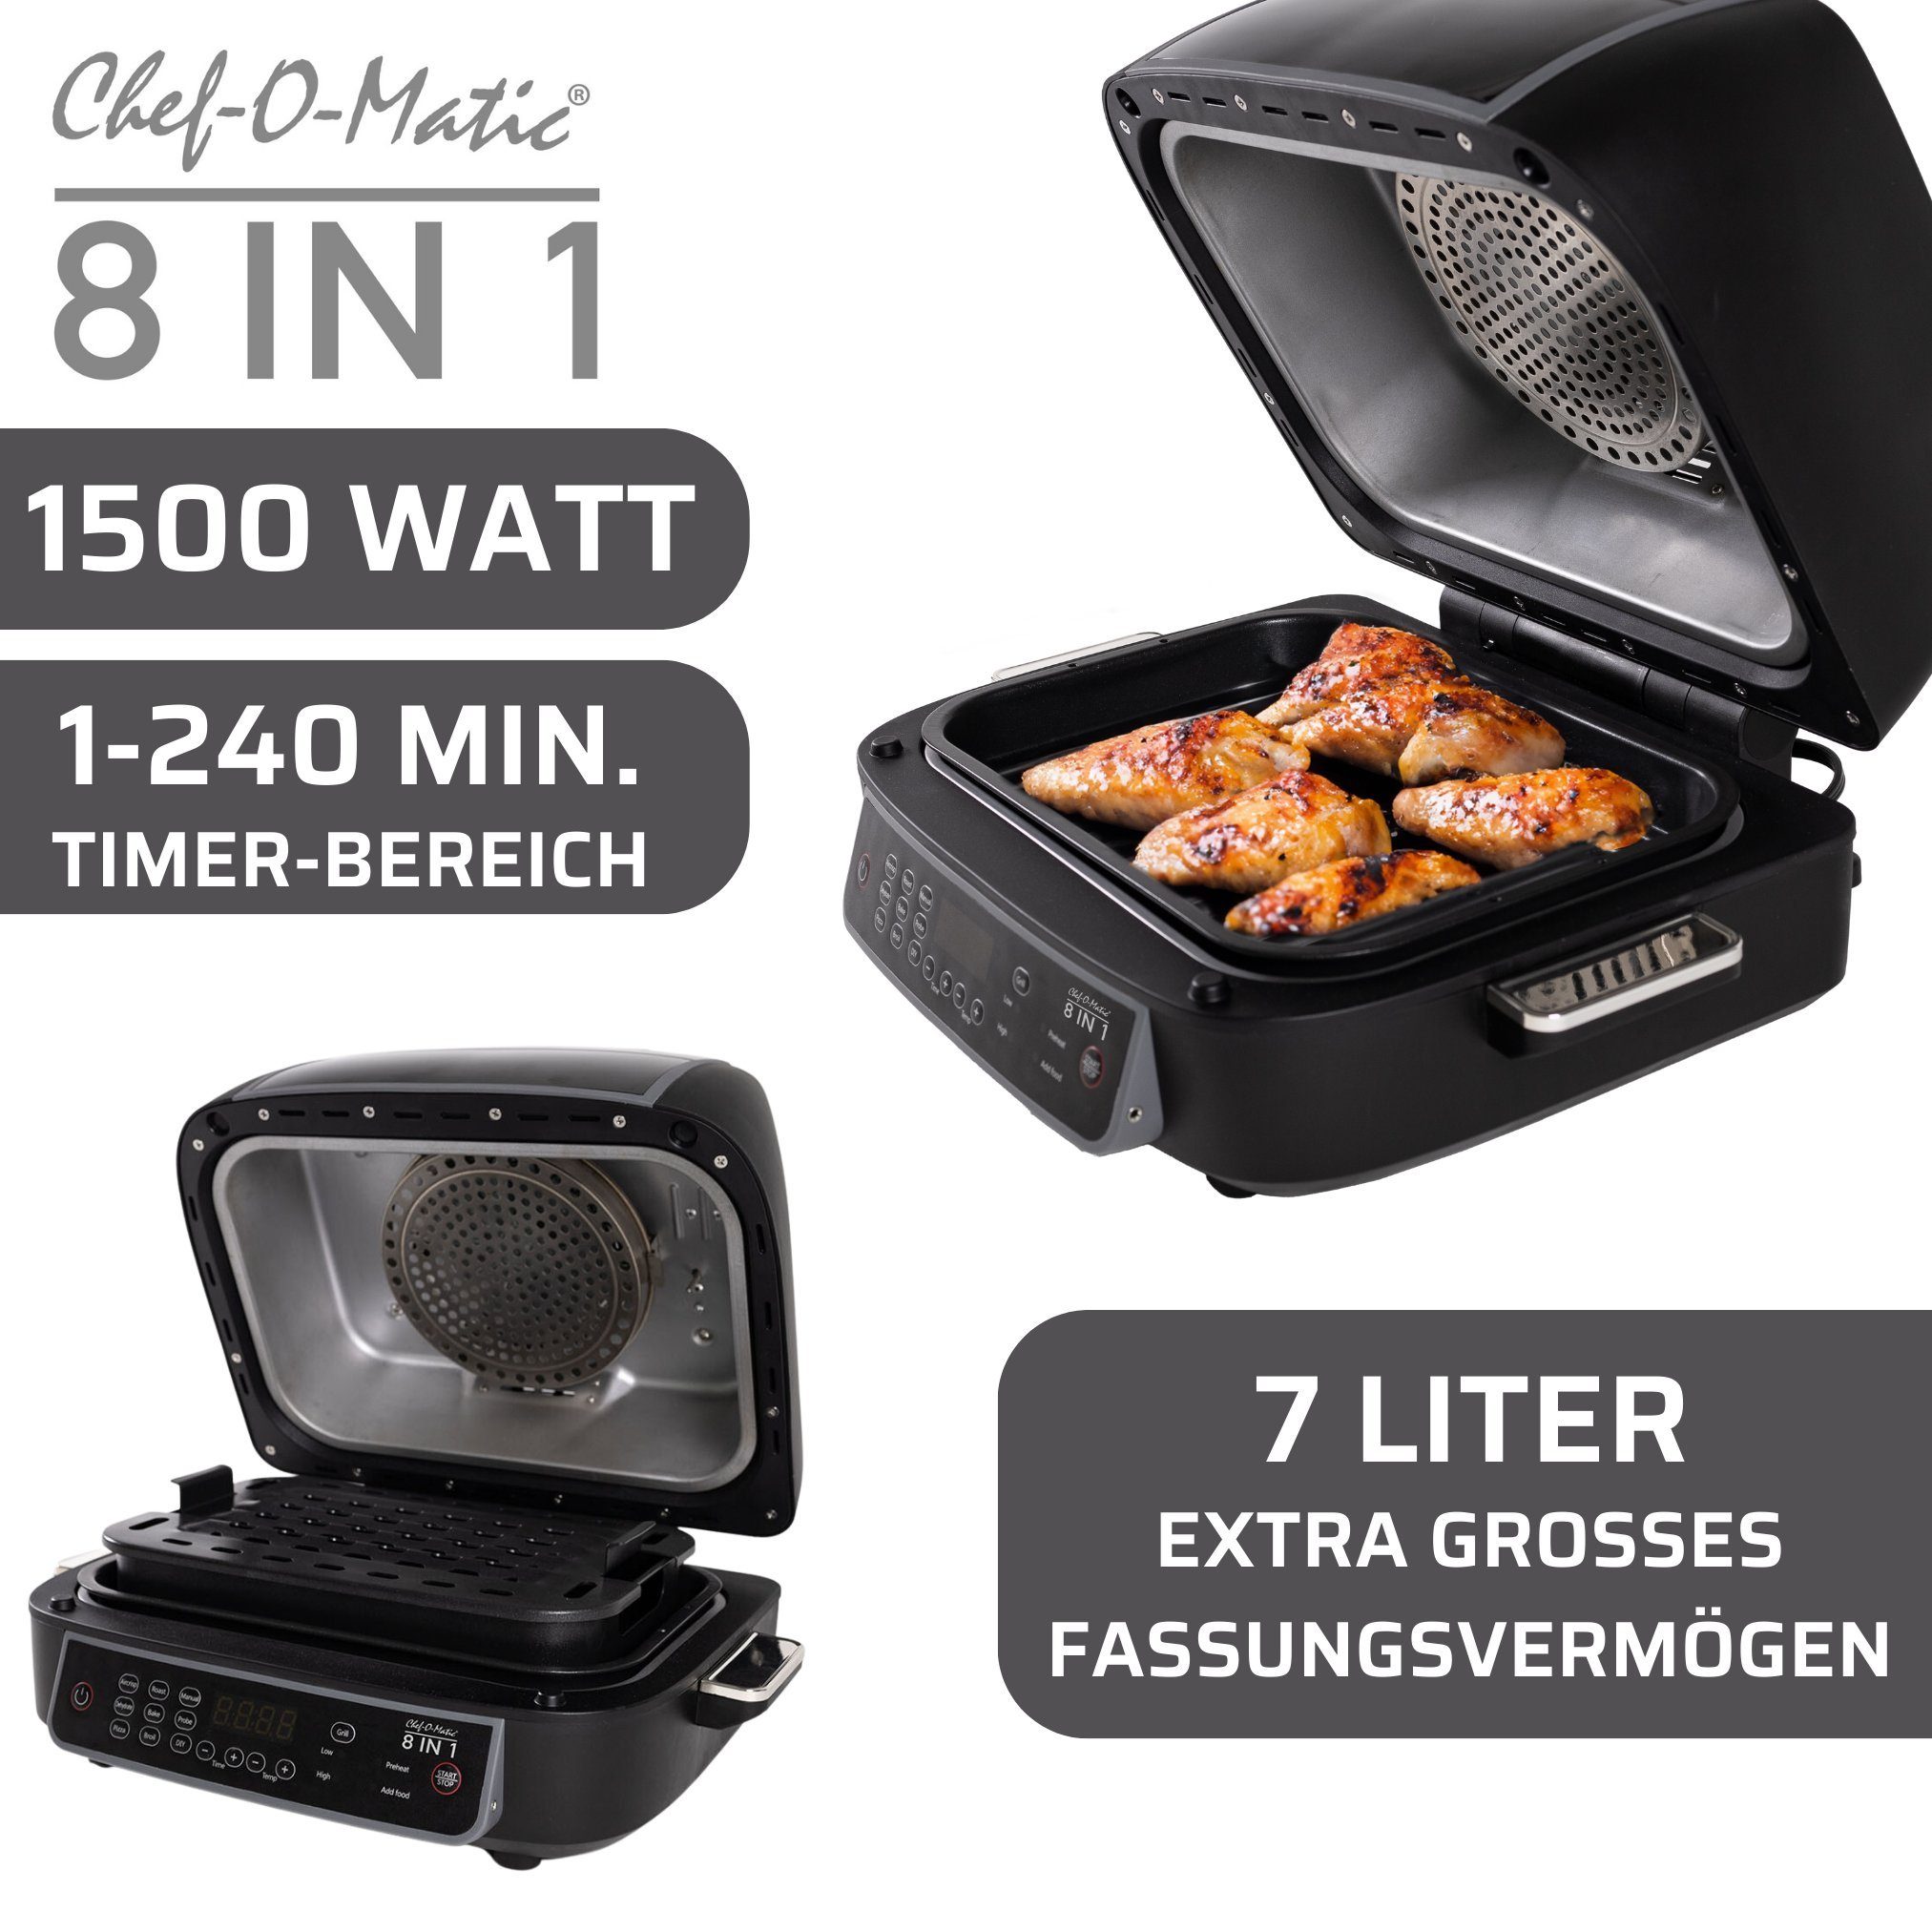 Best Direct® Air 1 in Indoor Fritteuse, Chef-O-Matic® 1500,00 Heißluftfritteuse Grill Backofen, Ofen 8 Heißluftofen, Multikocher, Mini Grill, & W